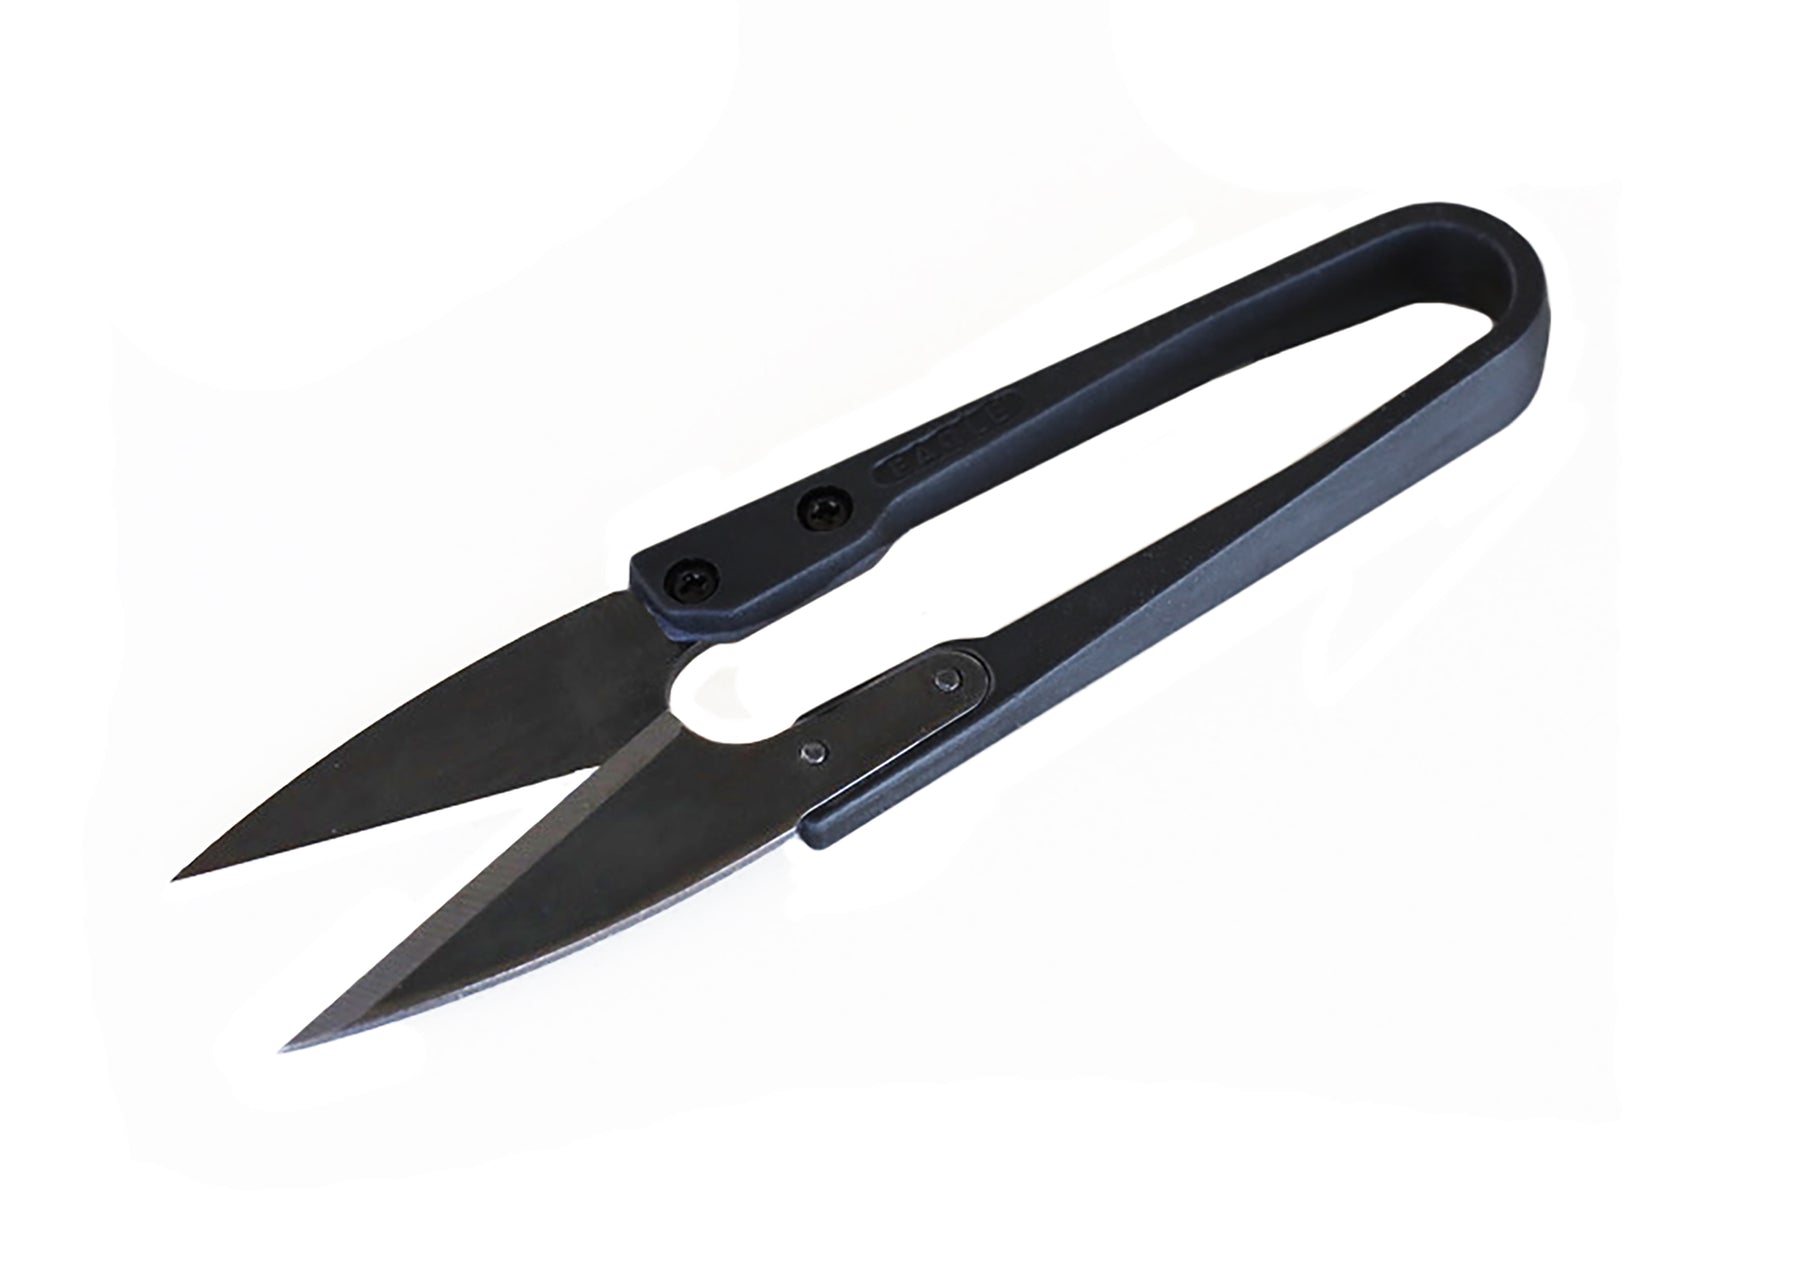 ALLEX Japanese Thread Snips for Sewing and Embroidery 4.5 (Long), Made in  JAPAN, Spring Loaded Small Thread Snippers Scissors, Black